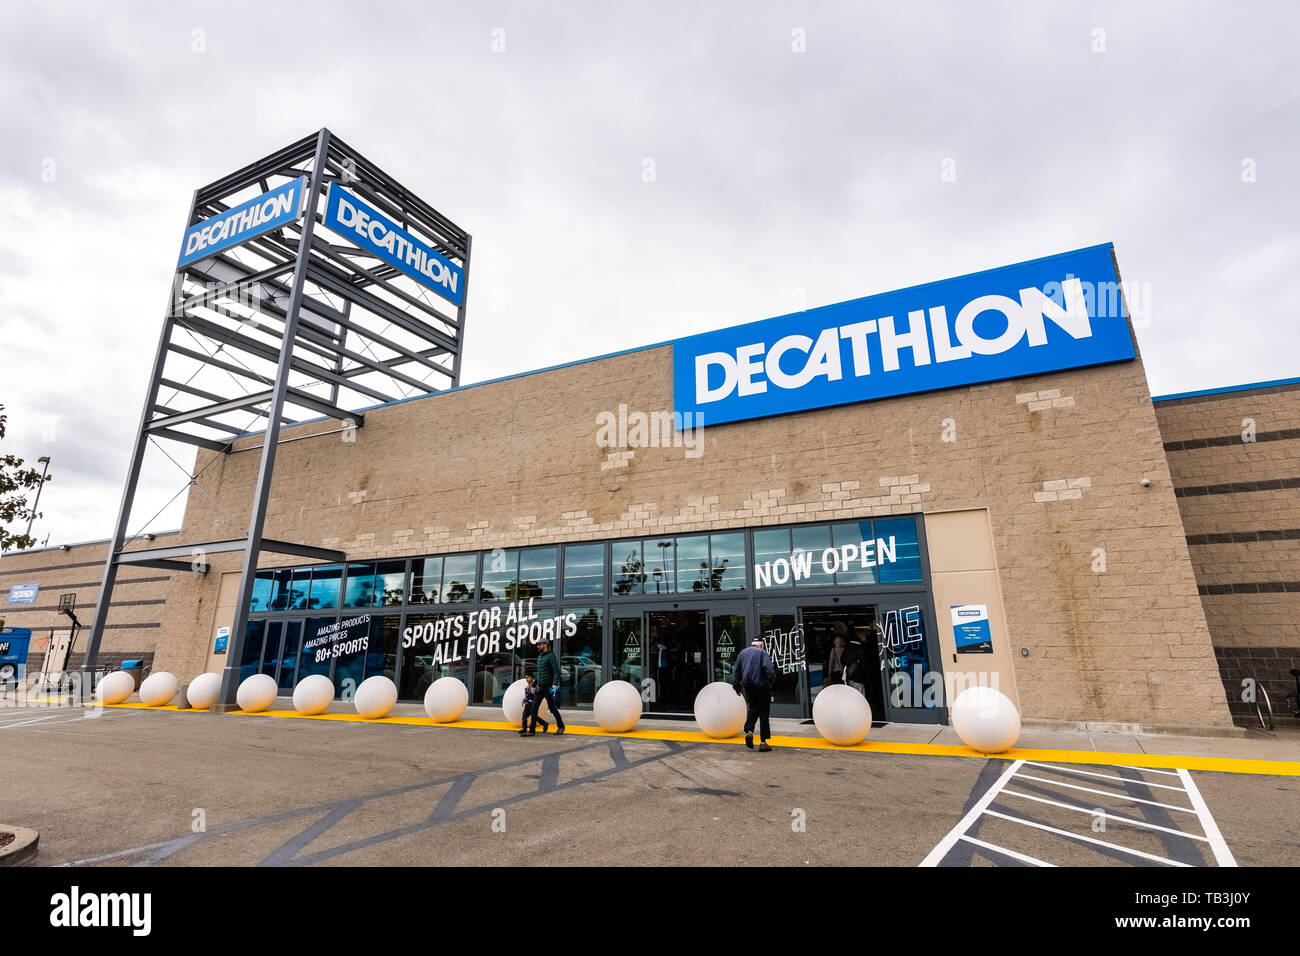 Decathlon, the world's largest store opens in USA - GRA